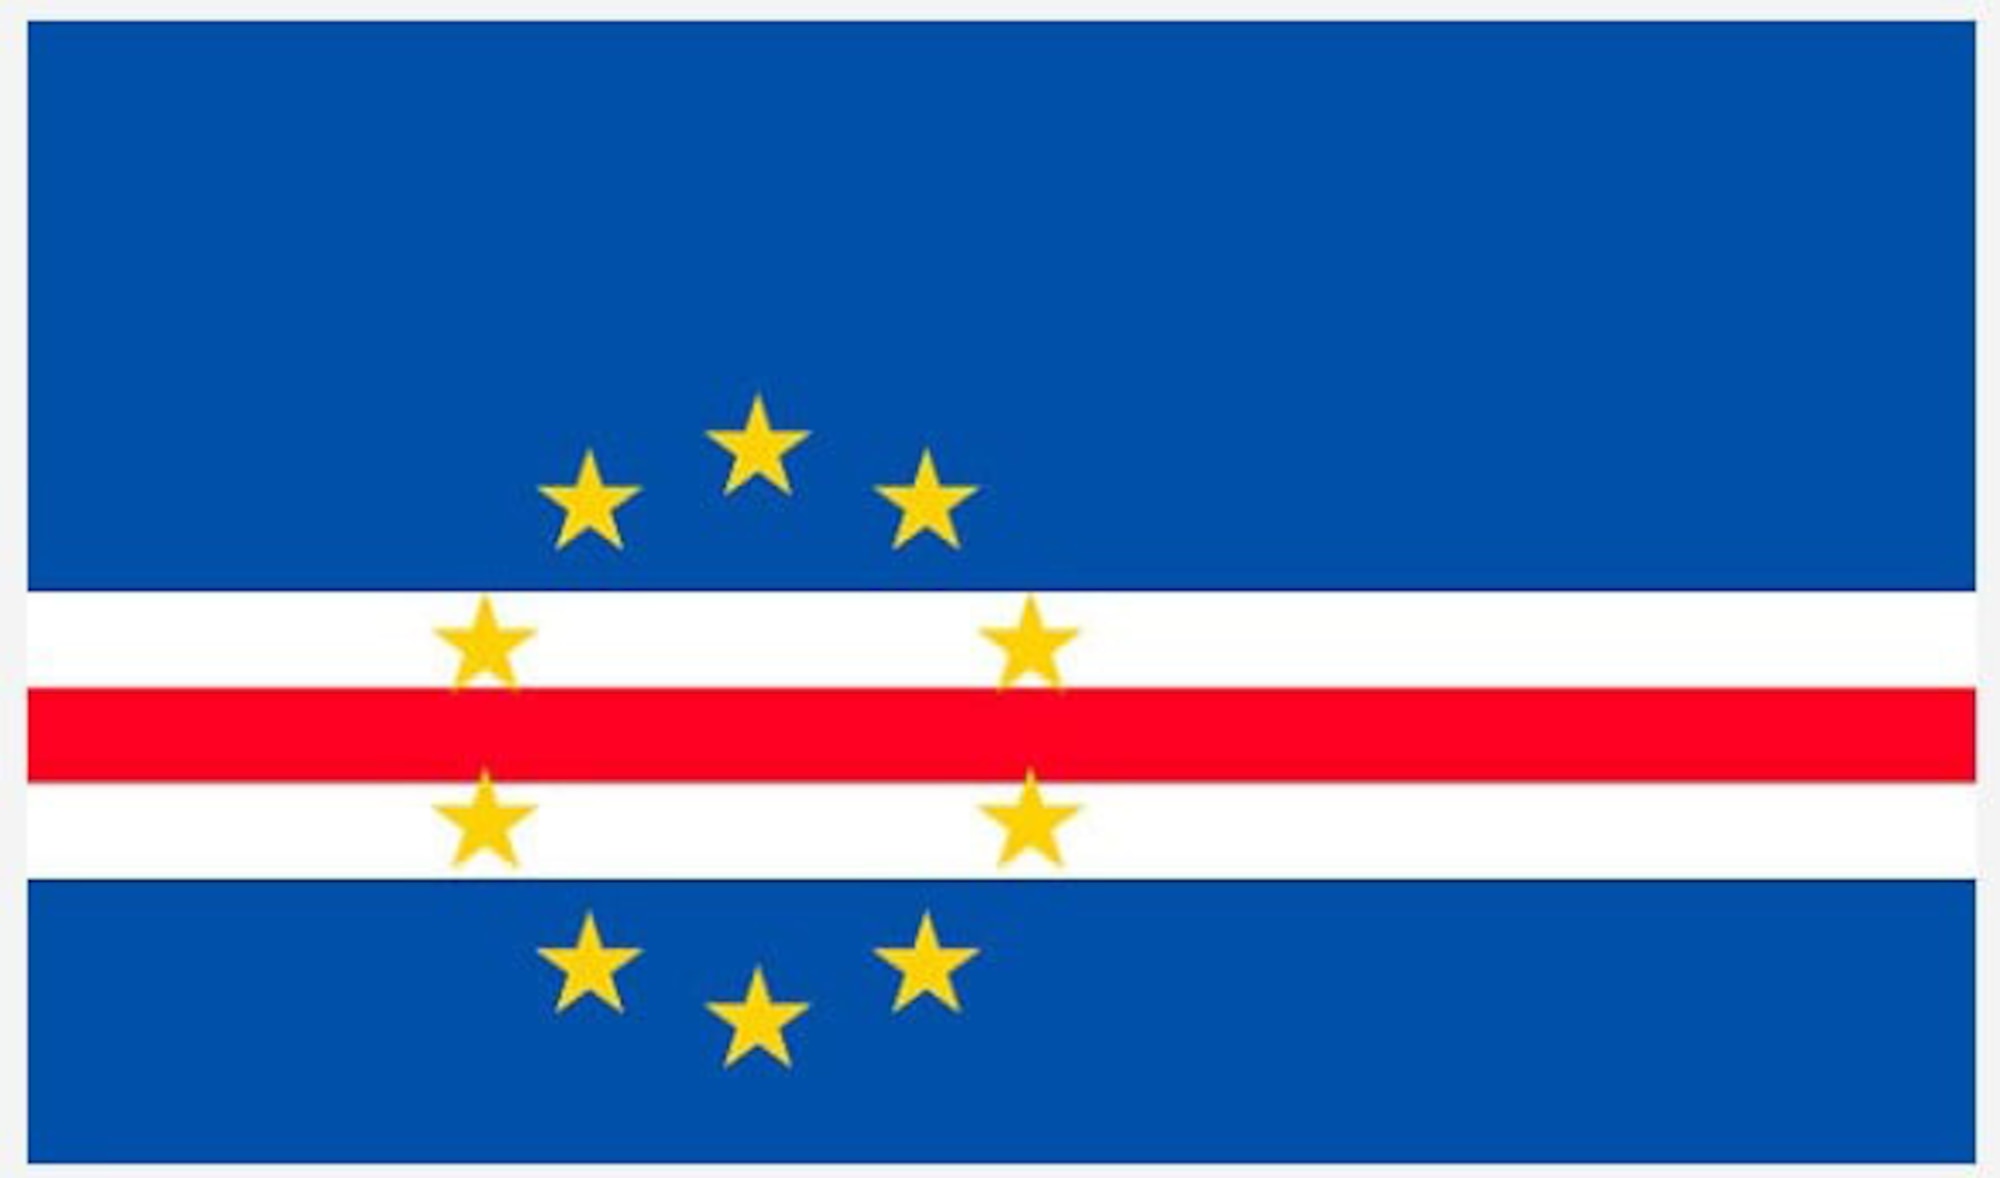 The Republic of Cabo Verde national flag, an archipelago in the Atlantic Ocean off the northwestern coast of Africa. The New Hampshire National Guard announced Oct. 18 it has been selected as the new state partner for the Republic of Cabo Verdea as part of the National Guard Bureau’s State Partnership Program, which promotes mutual allied support for strategic national and global defense.